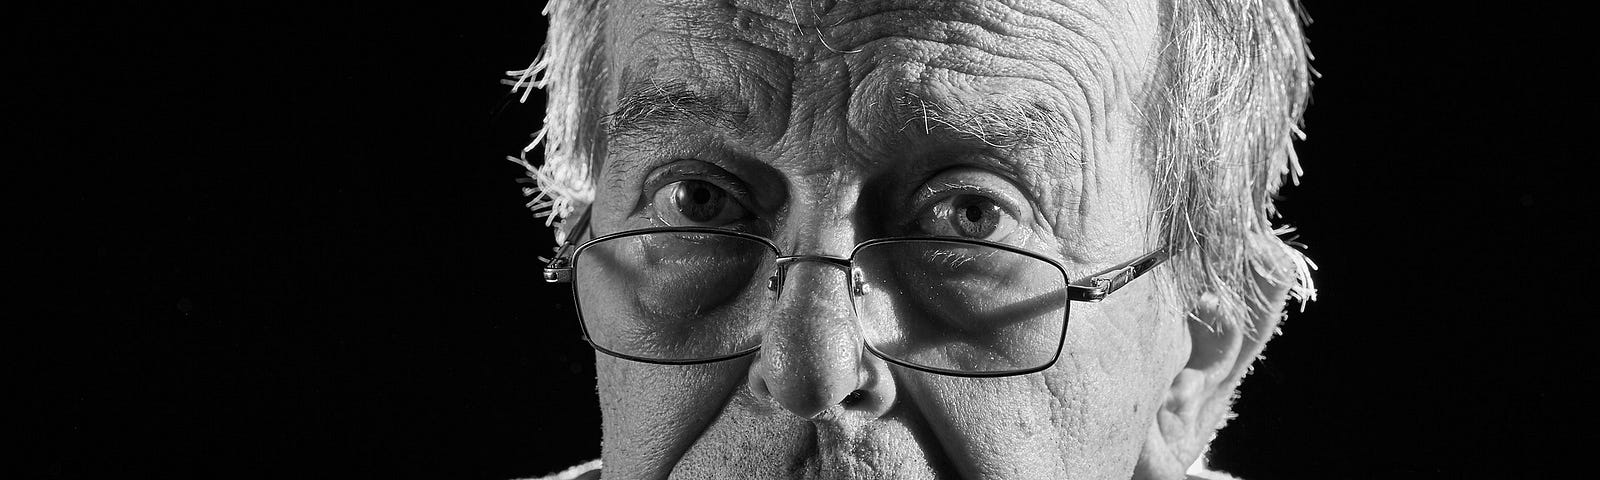 Black and white photo of an old man with glasses, looking morose